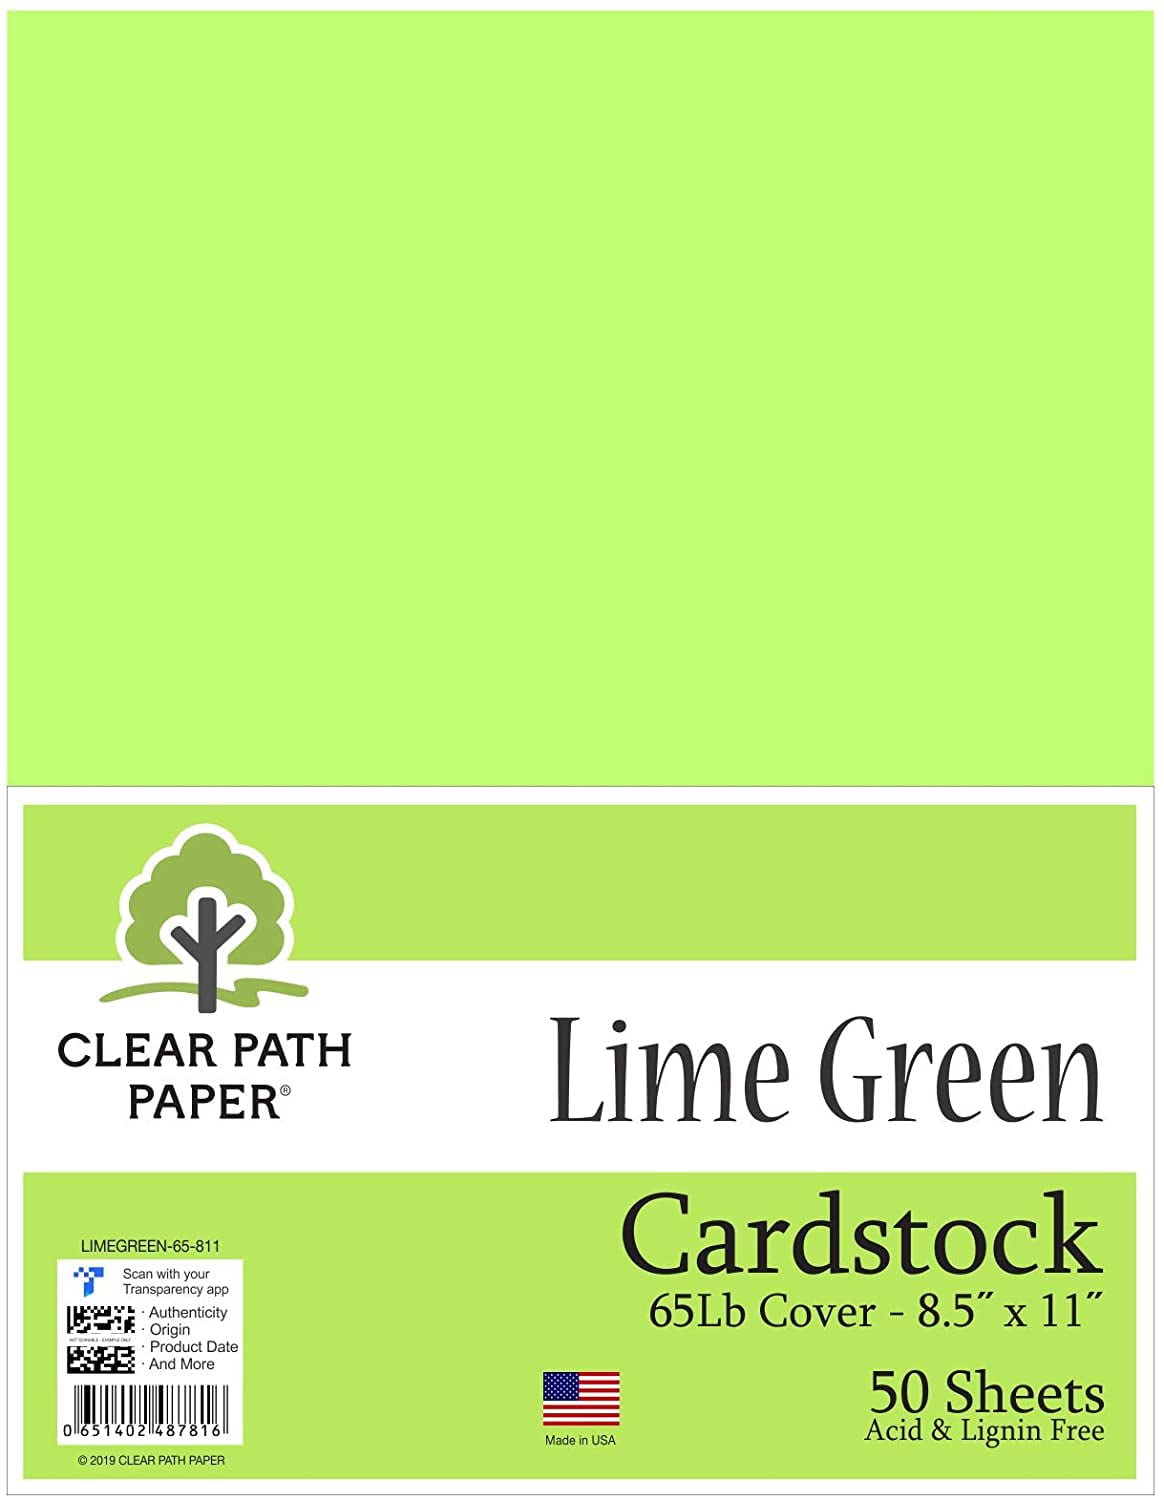 8.5 x 11 inch 65Lb Cover 50 Sheets Lime Green Cardstock 